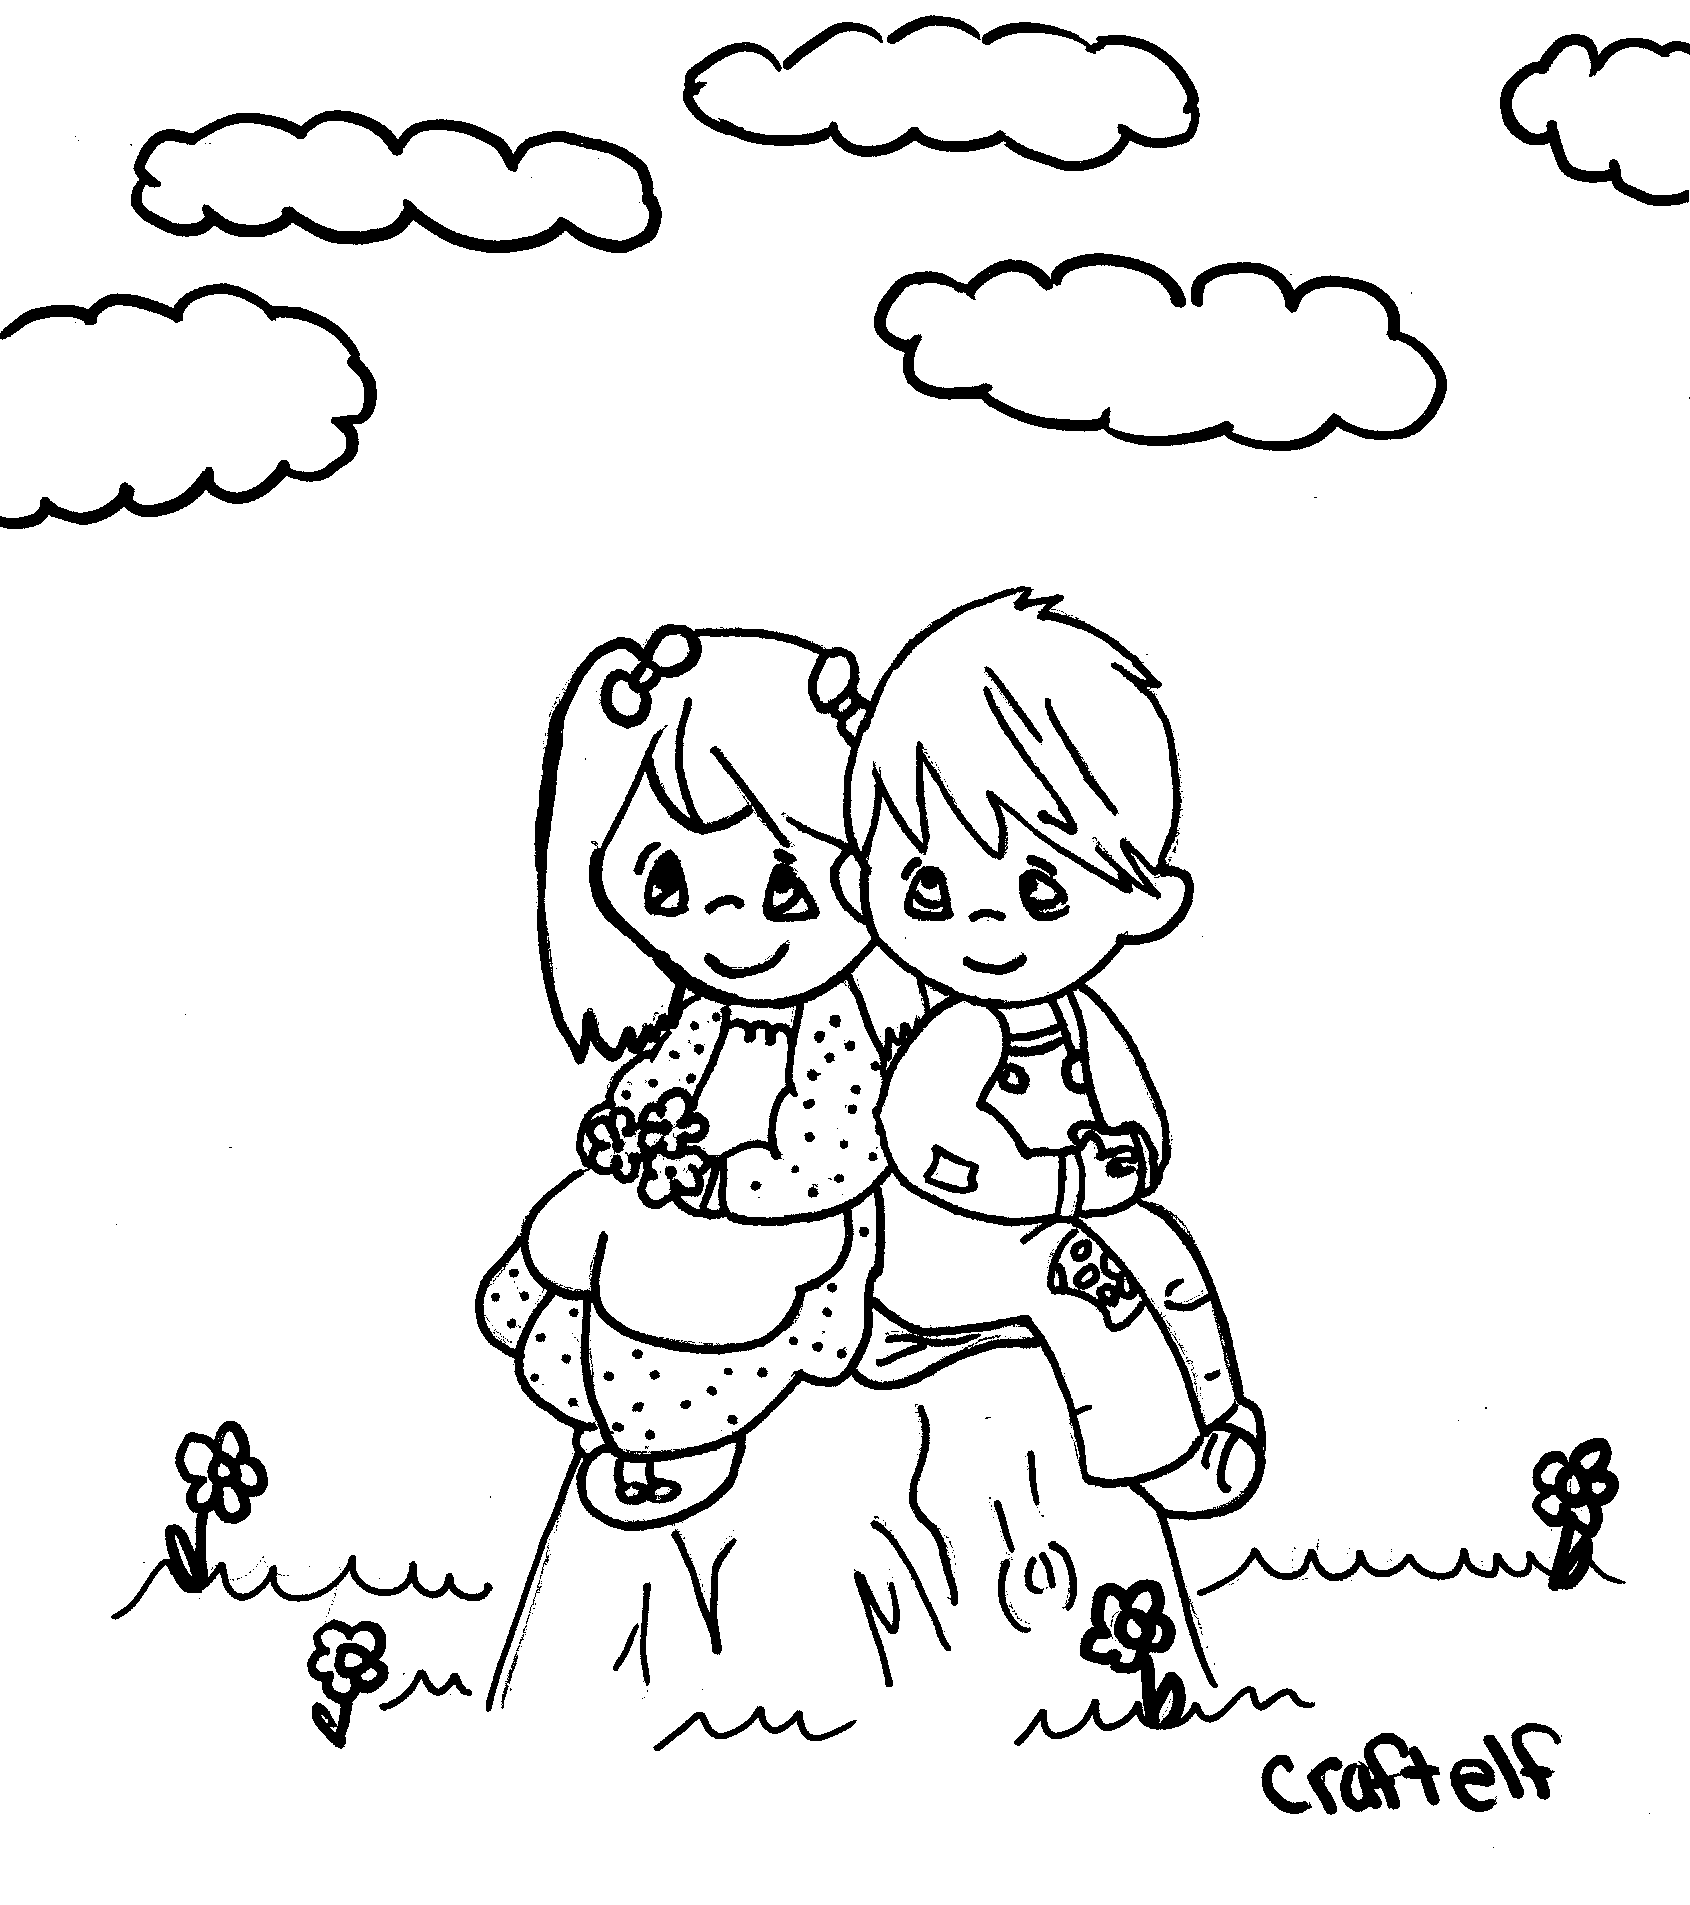 Boy & Girl coloring page